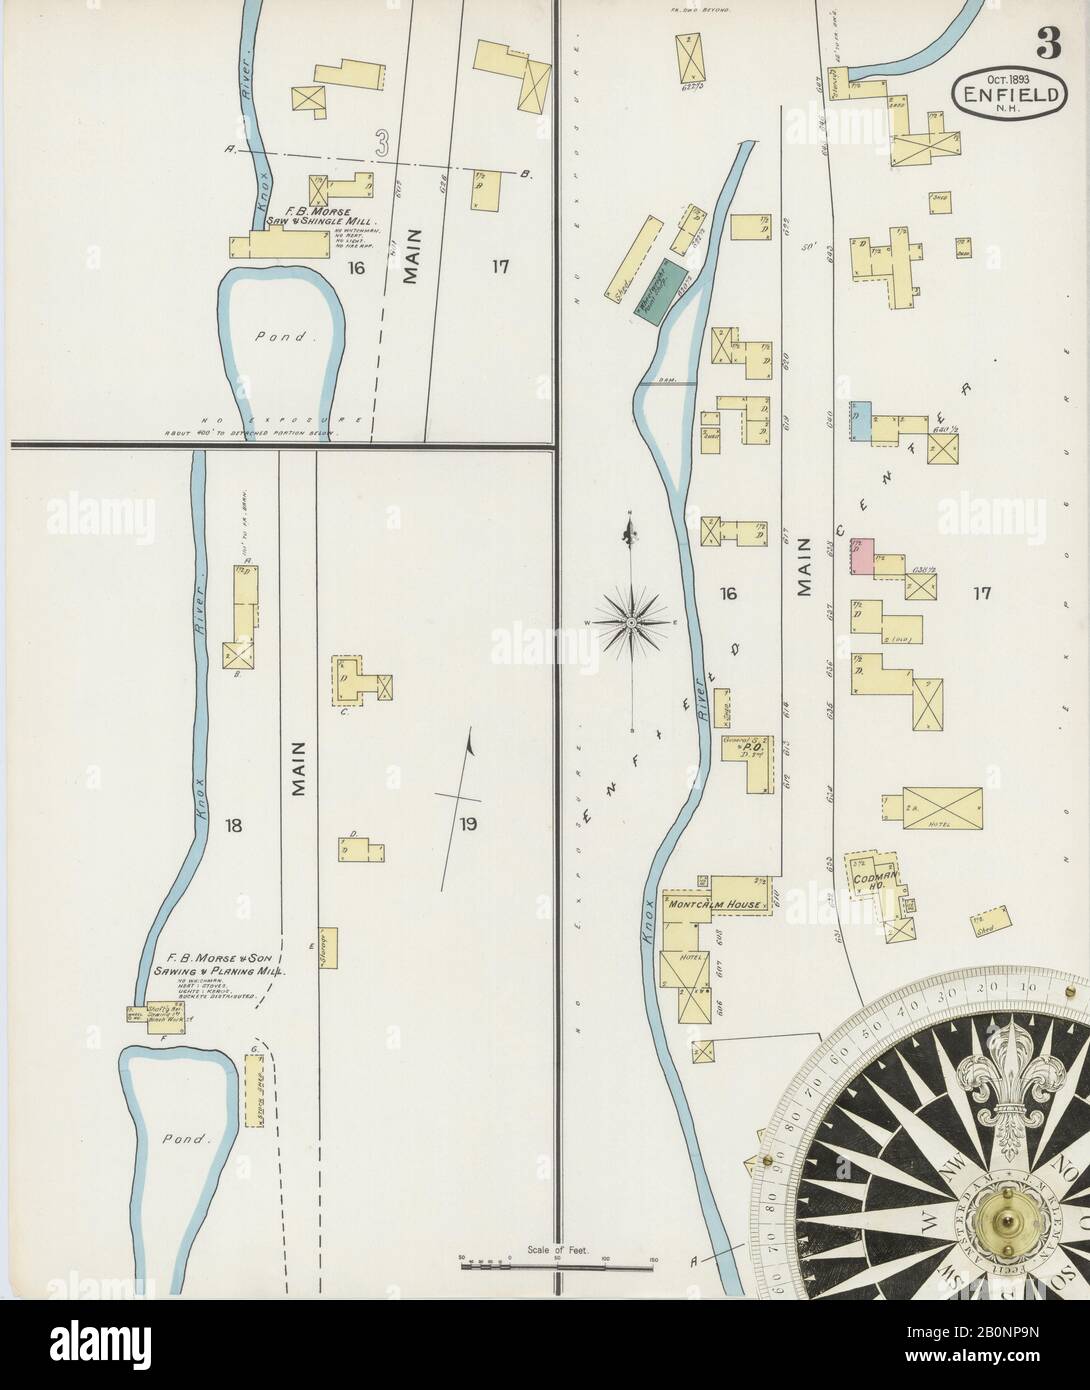 Image 3 of Sanborn Fire Insurance Map from Enfield, Grafton County, New Hampshire. Oct 1893. 3 Sheet(s), America, street map with a Nineteenth Century compass Stock Photo